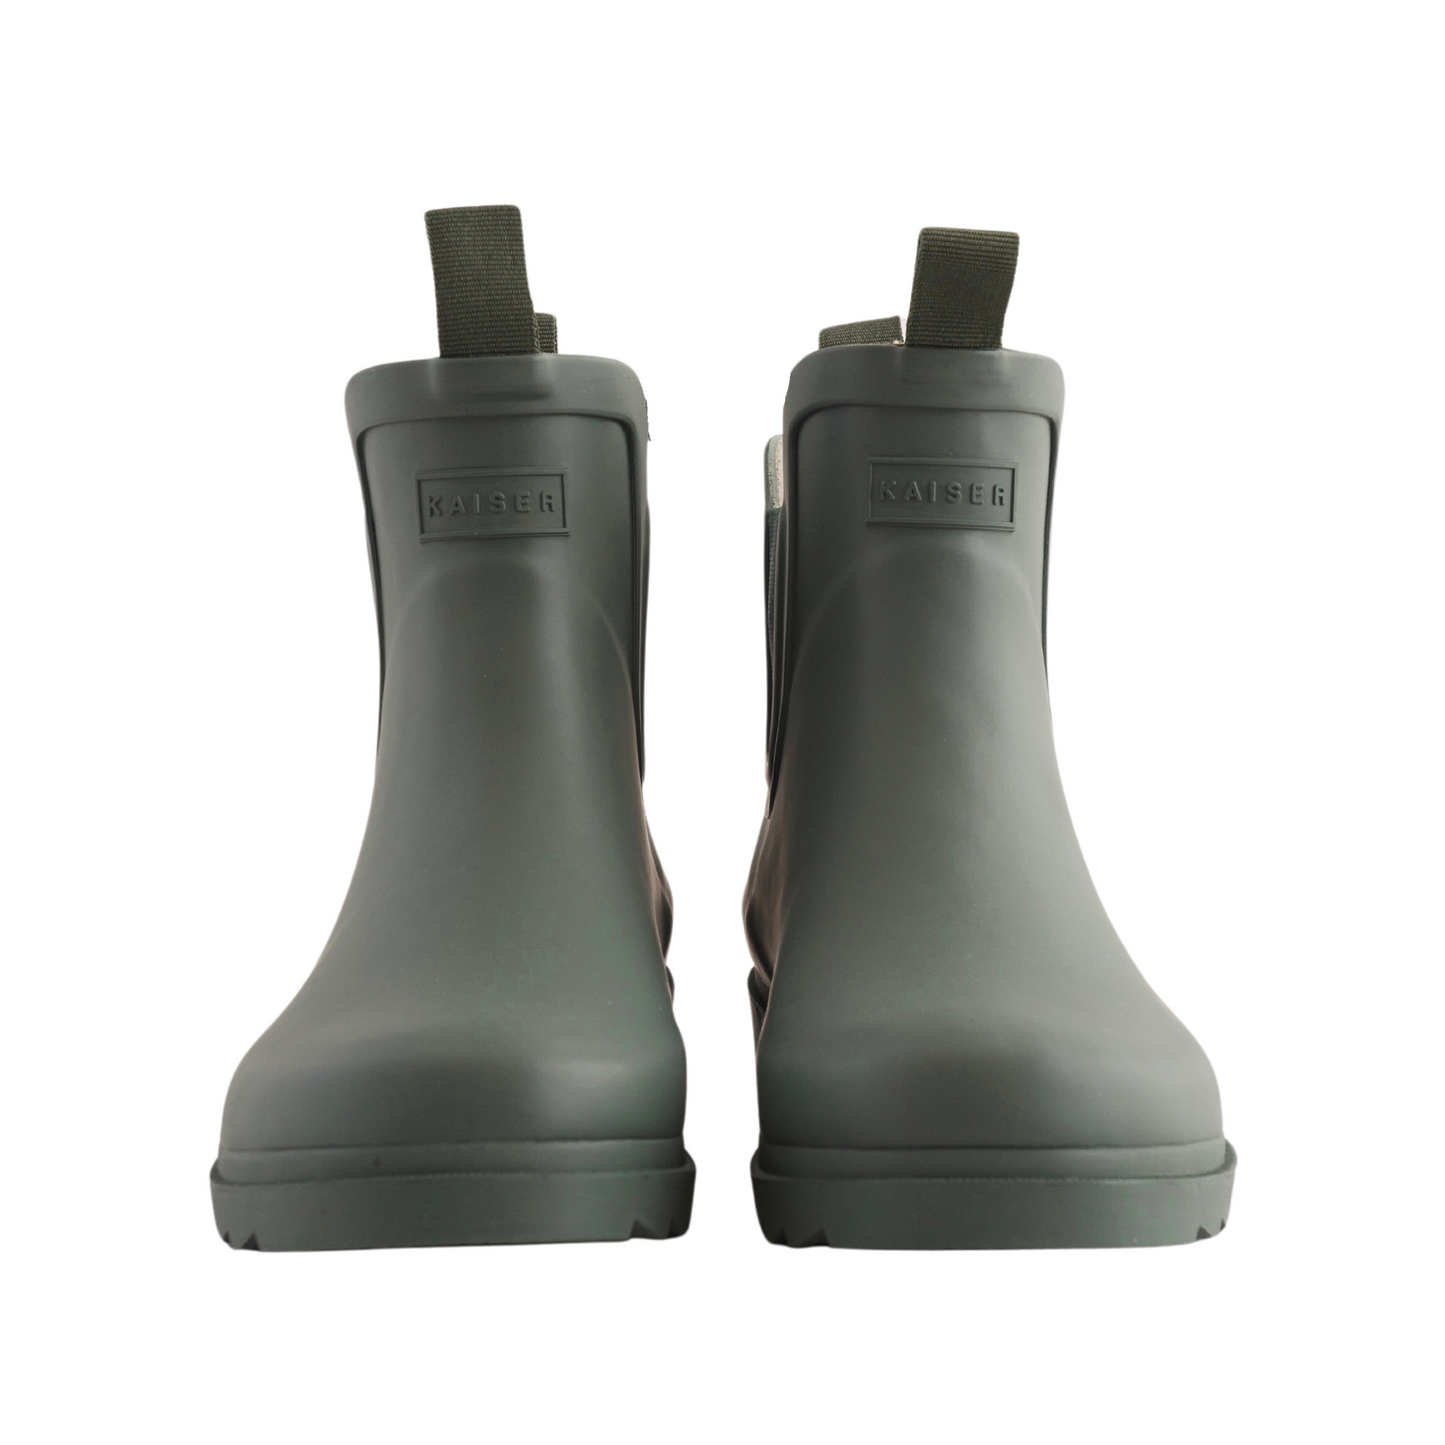 Ankle Gumboots - Green Size 10